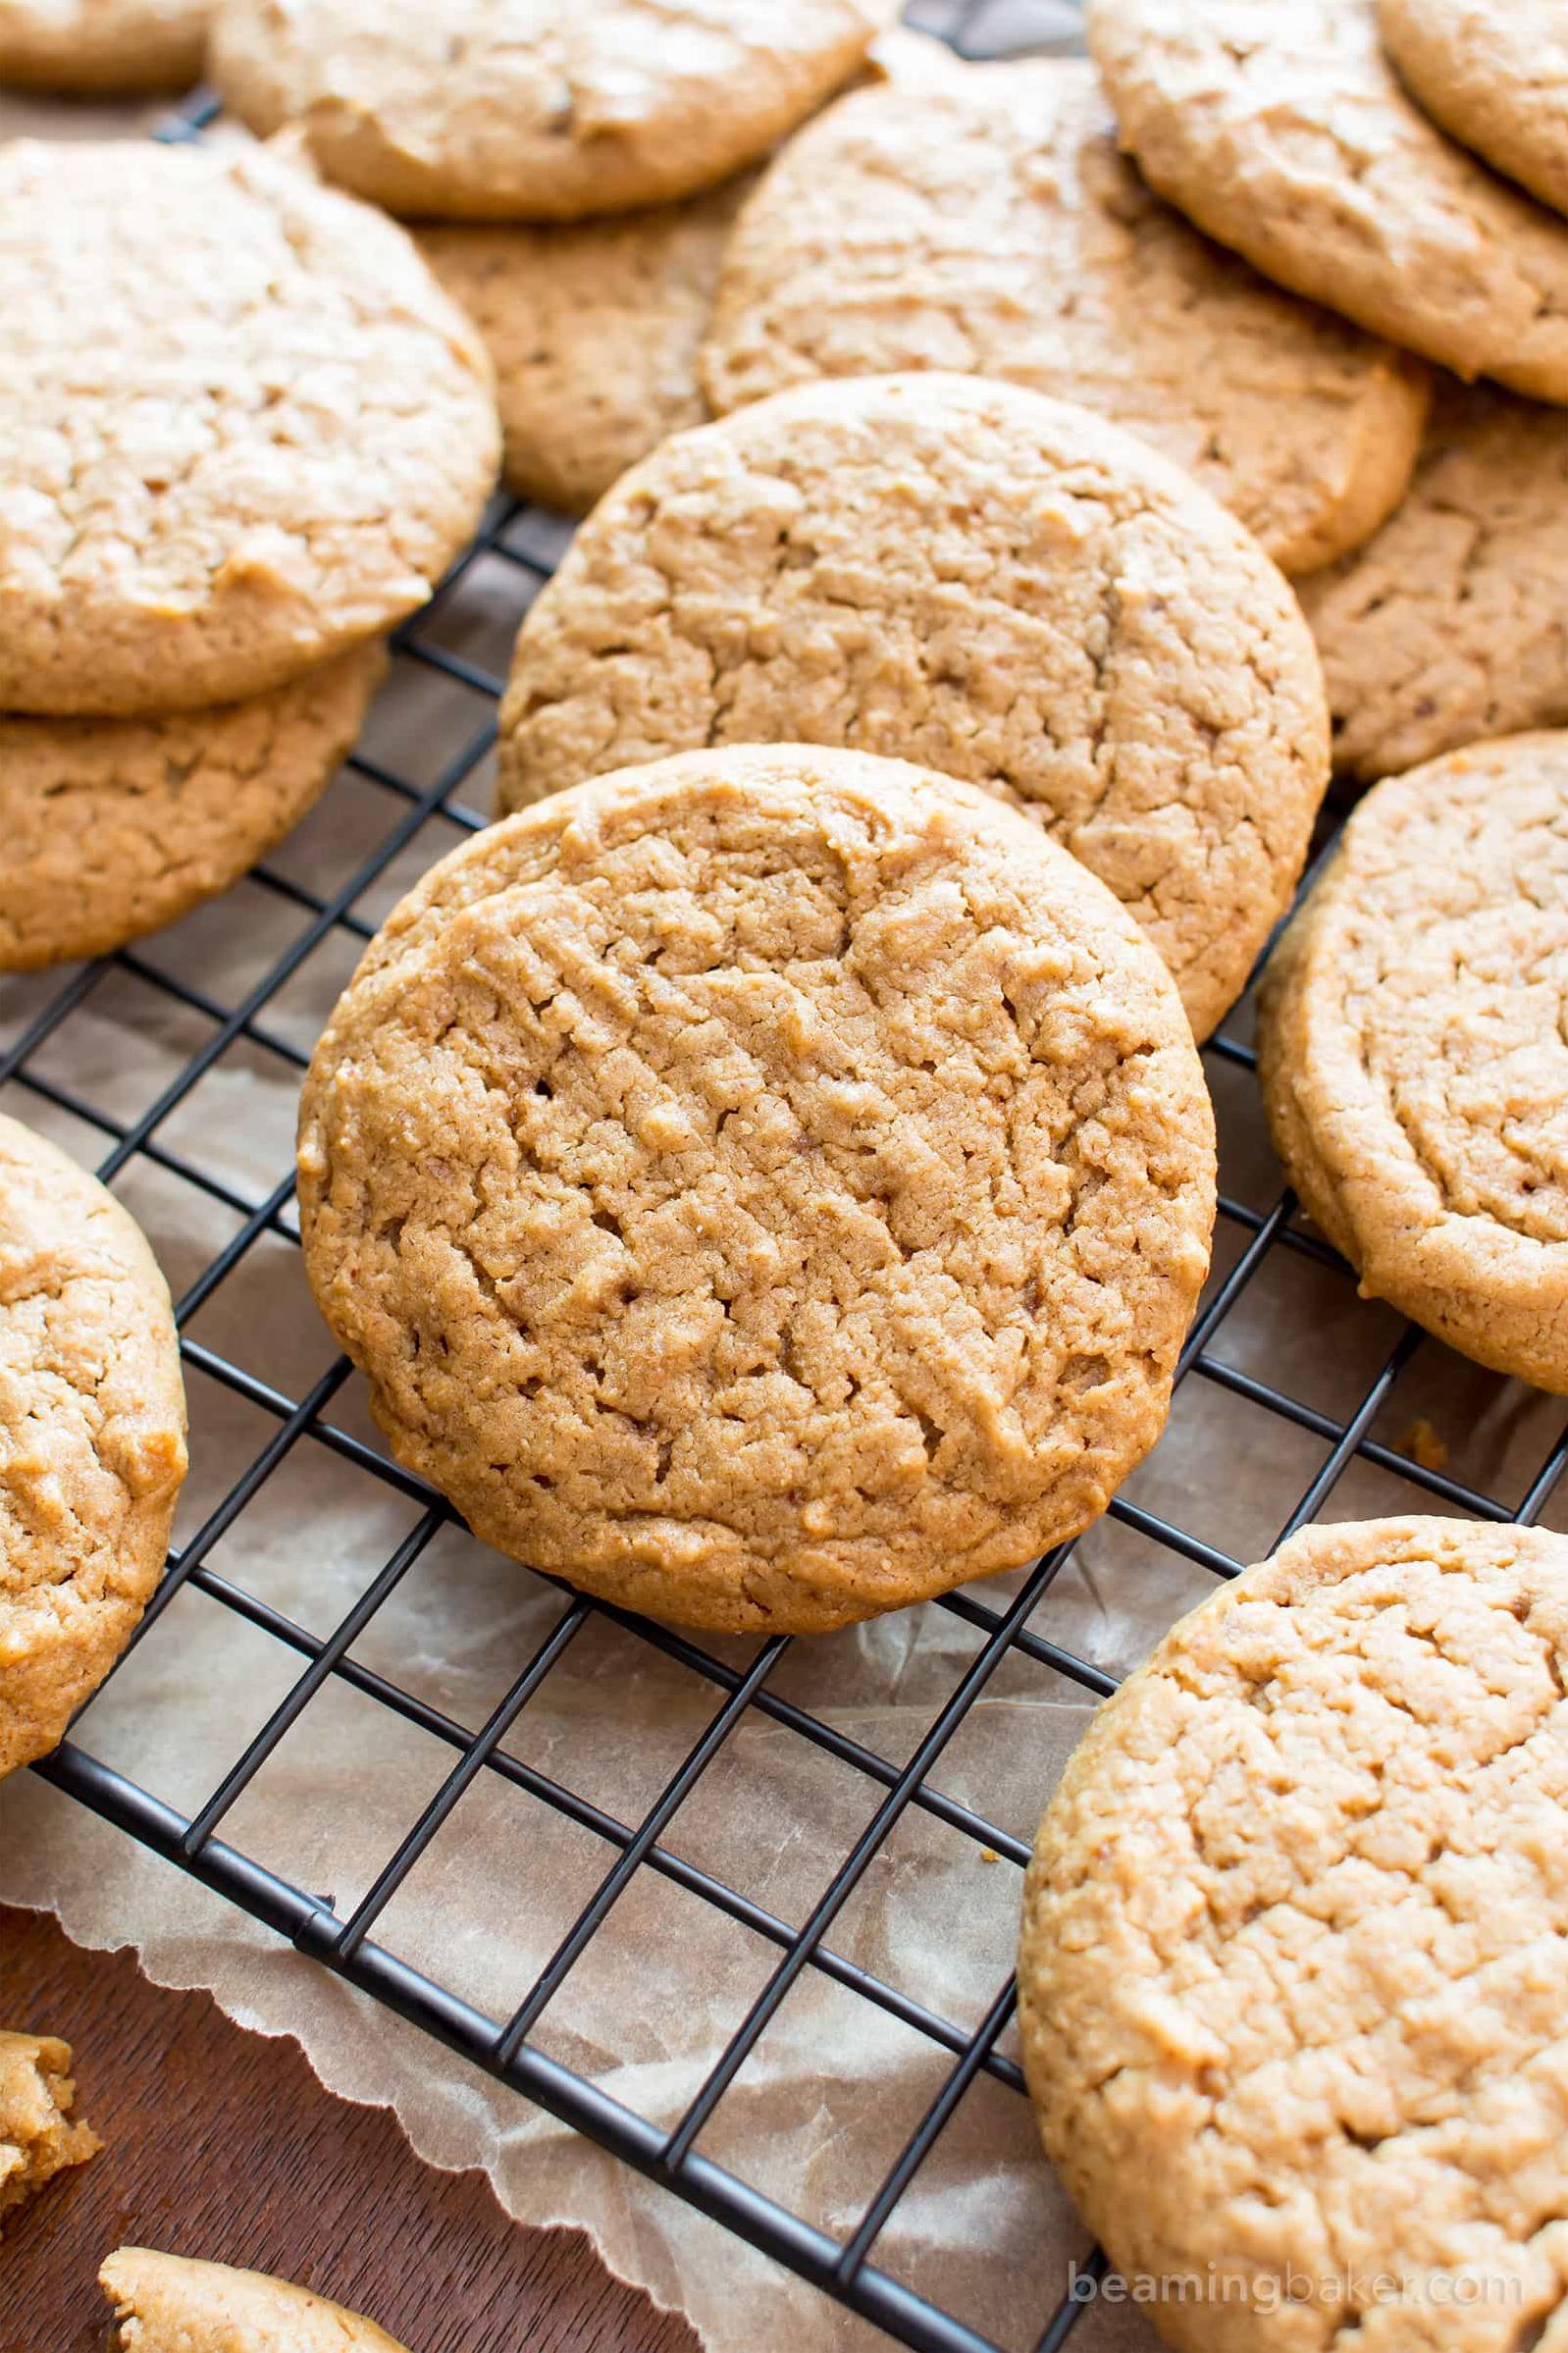  The perfect balance between crunchy and chewy, these cookies are heavenly.